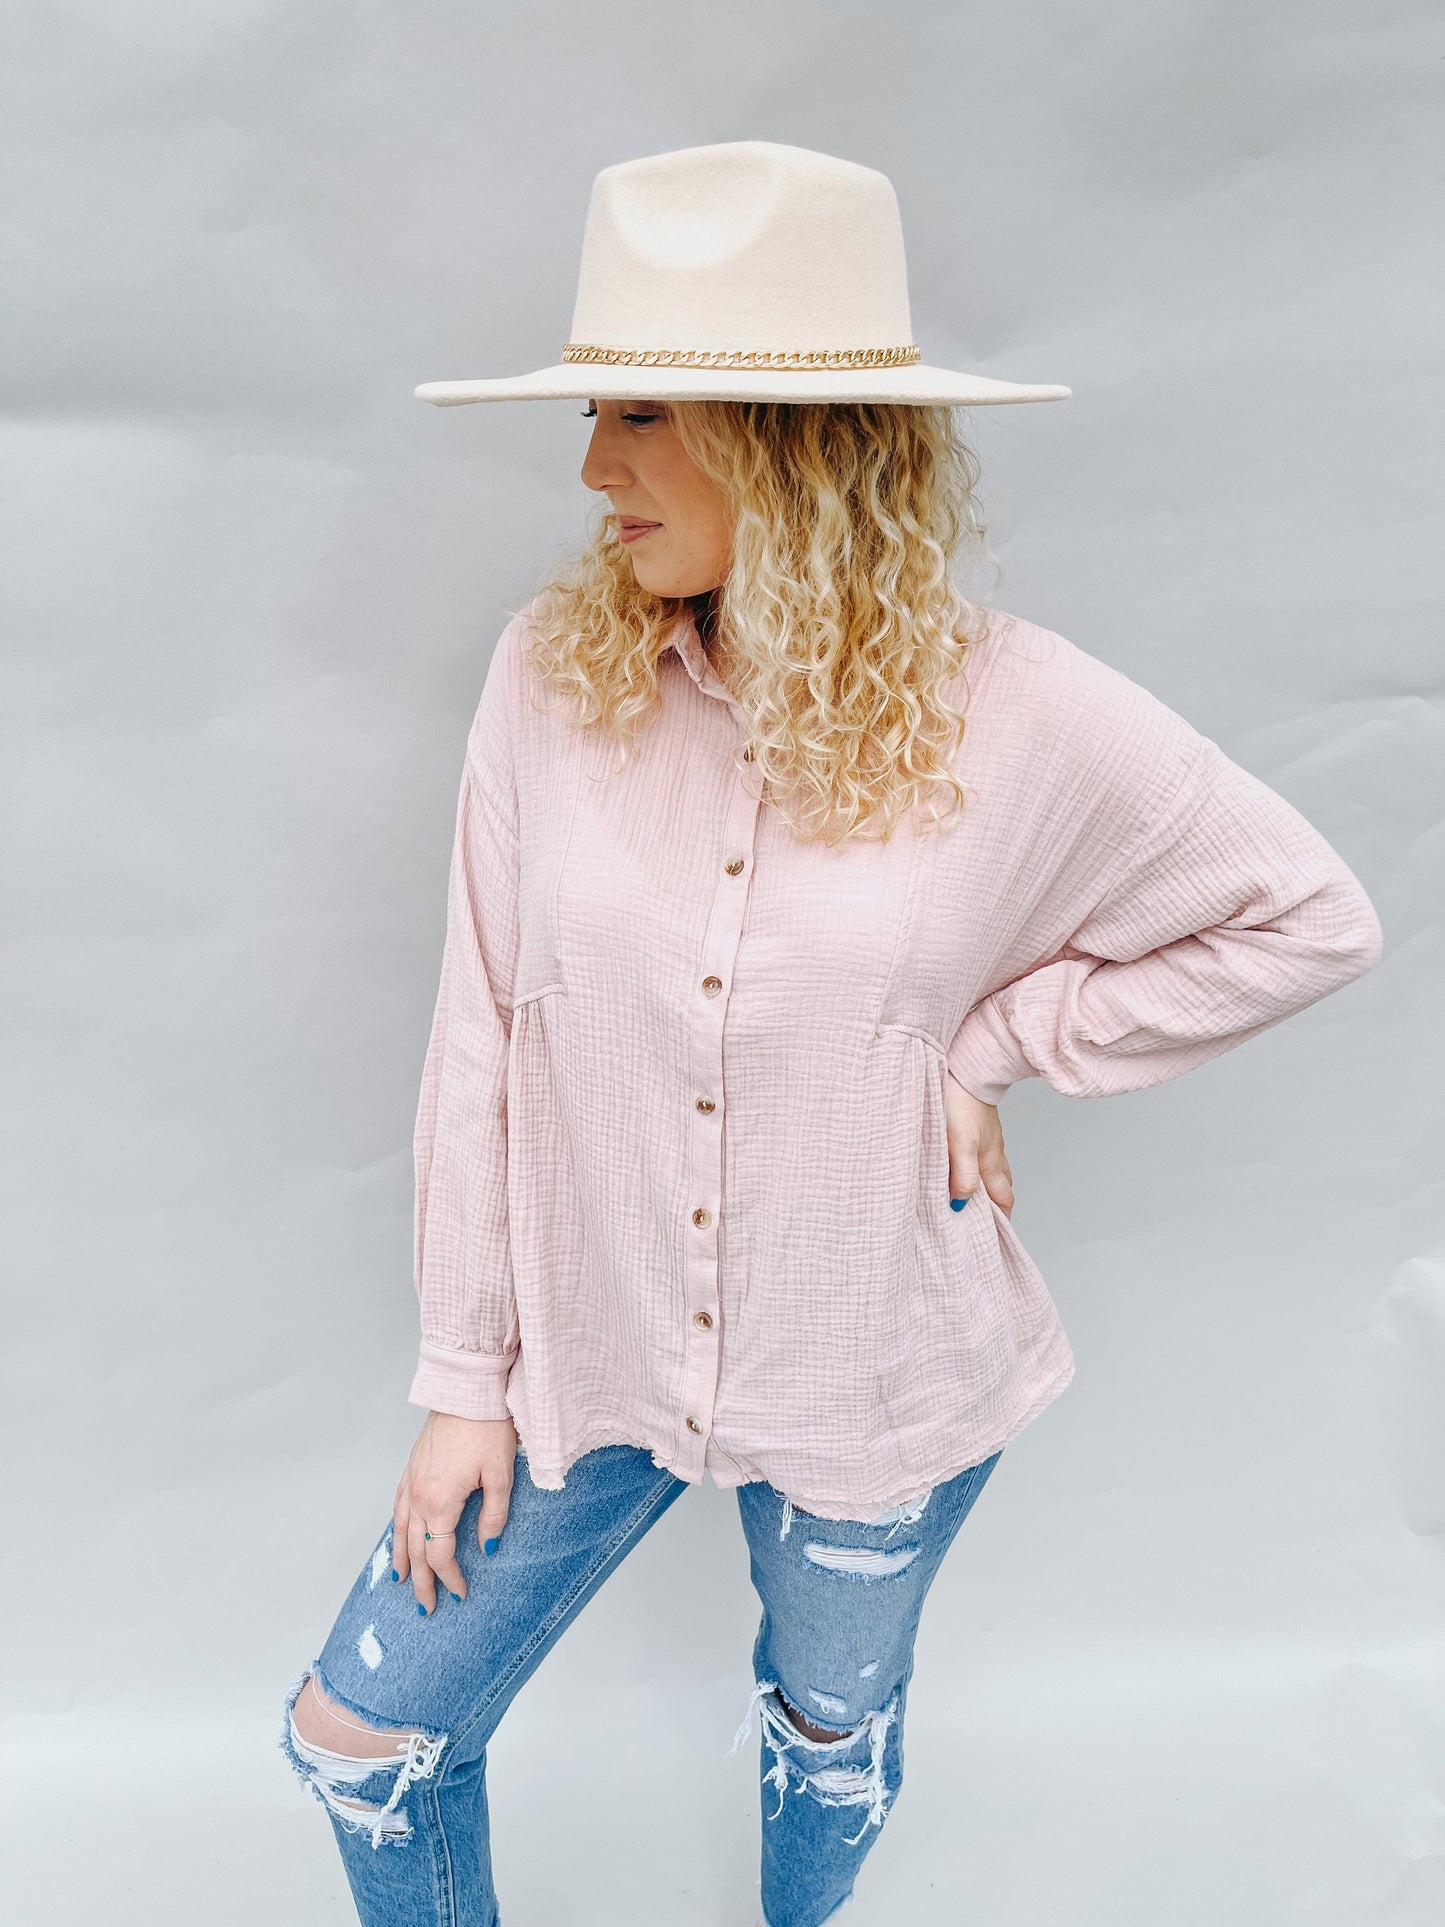 Fashionable model wearing a light pink linen button-up shirt, paired with distressed jeans and a wide-brim hat, exuding a relaxed and trendy vibe